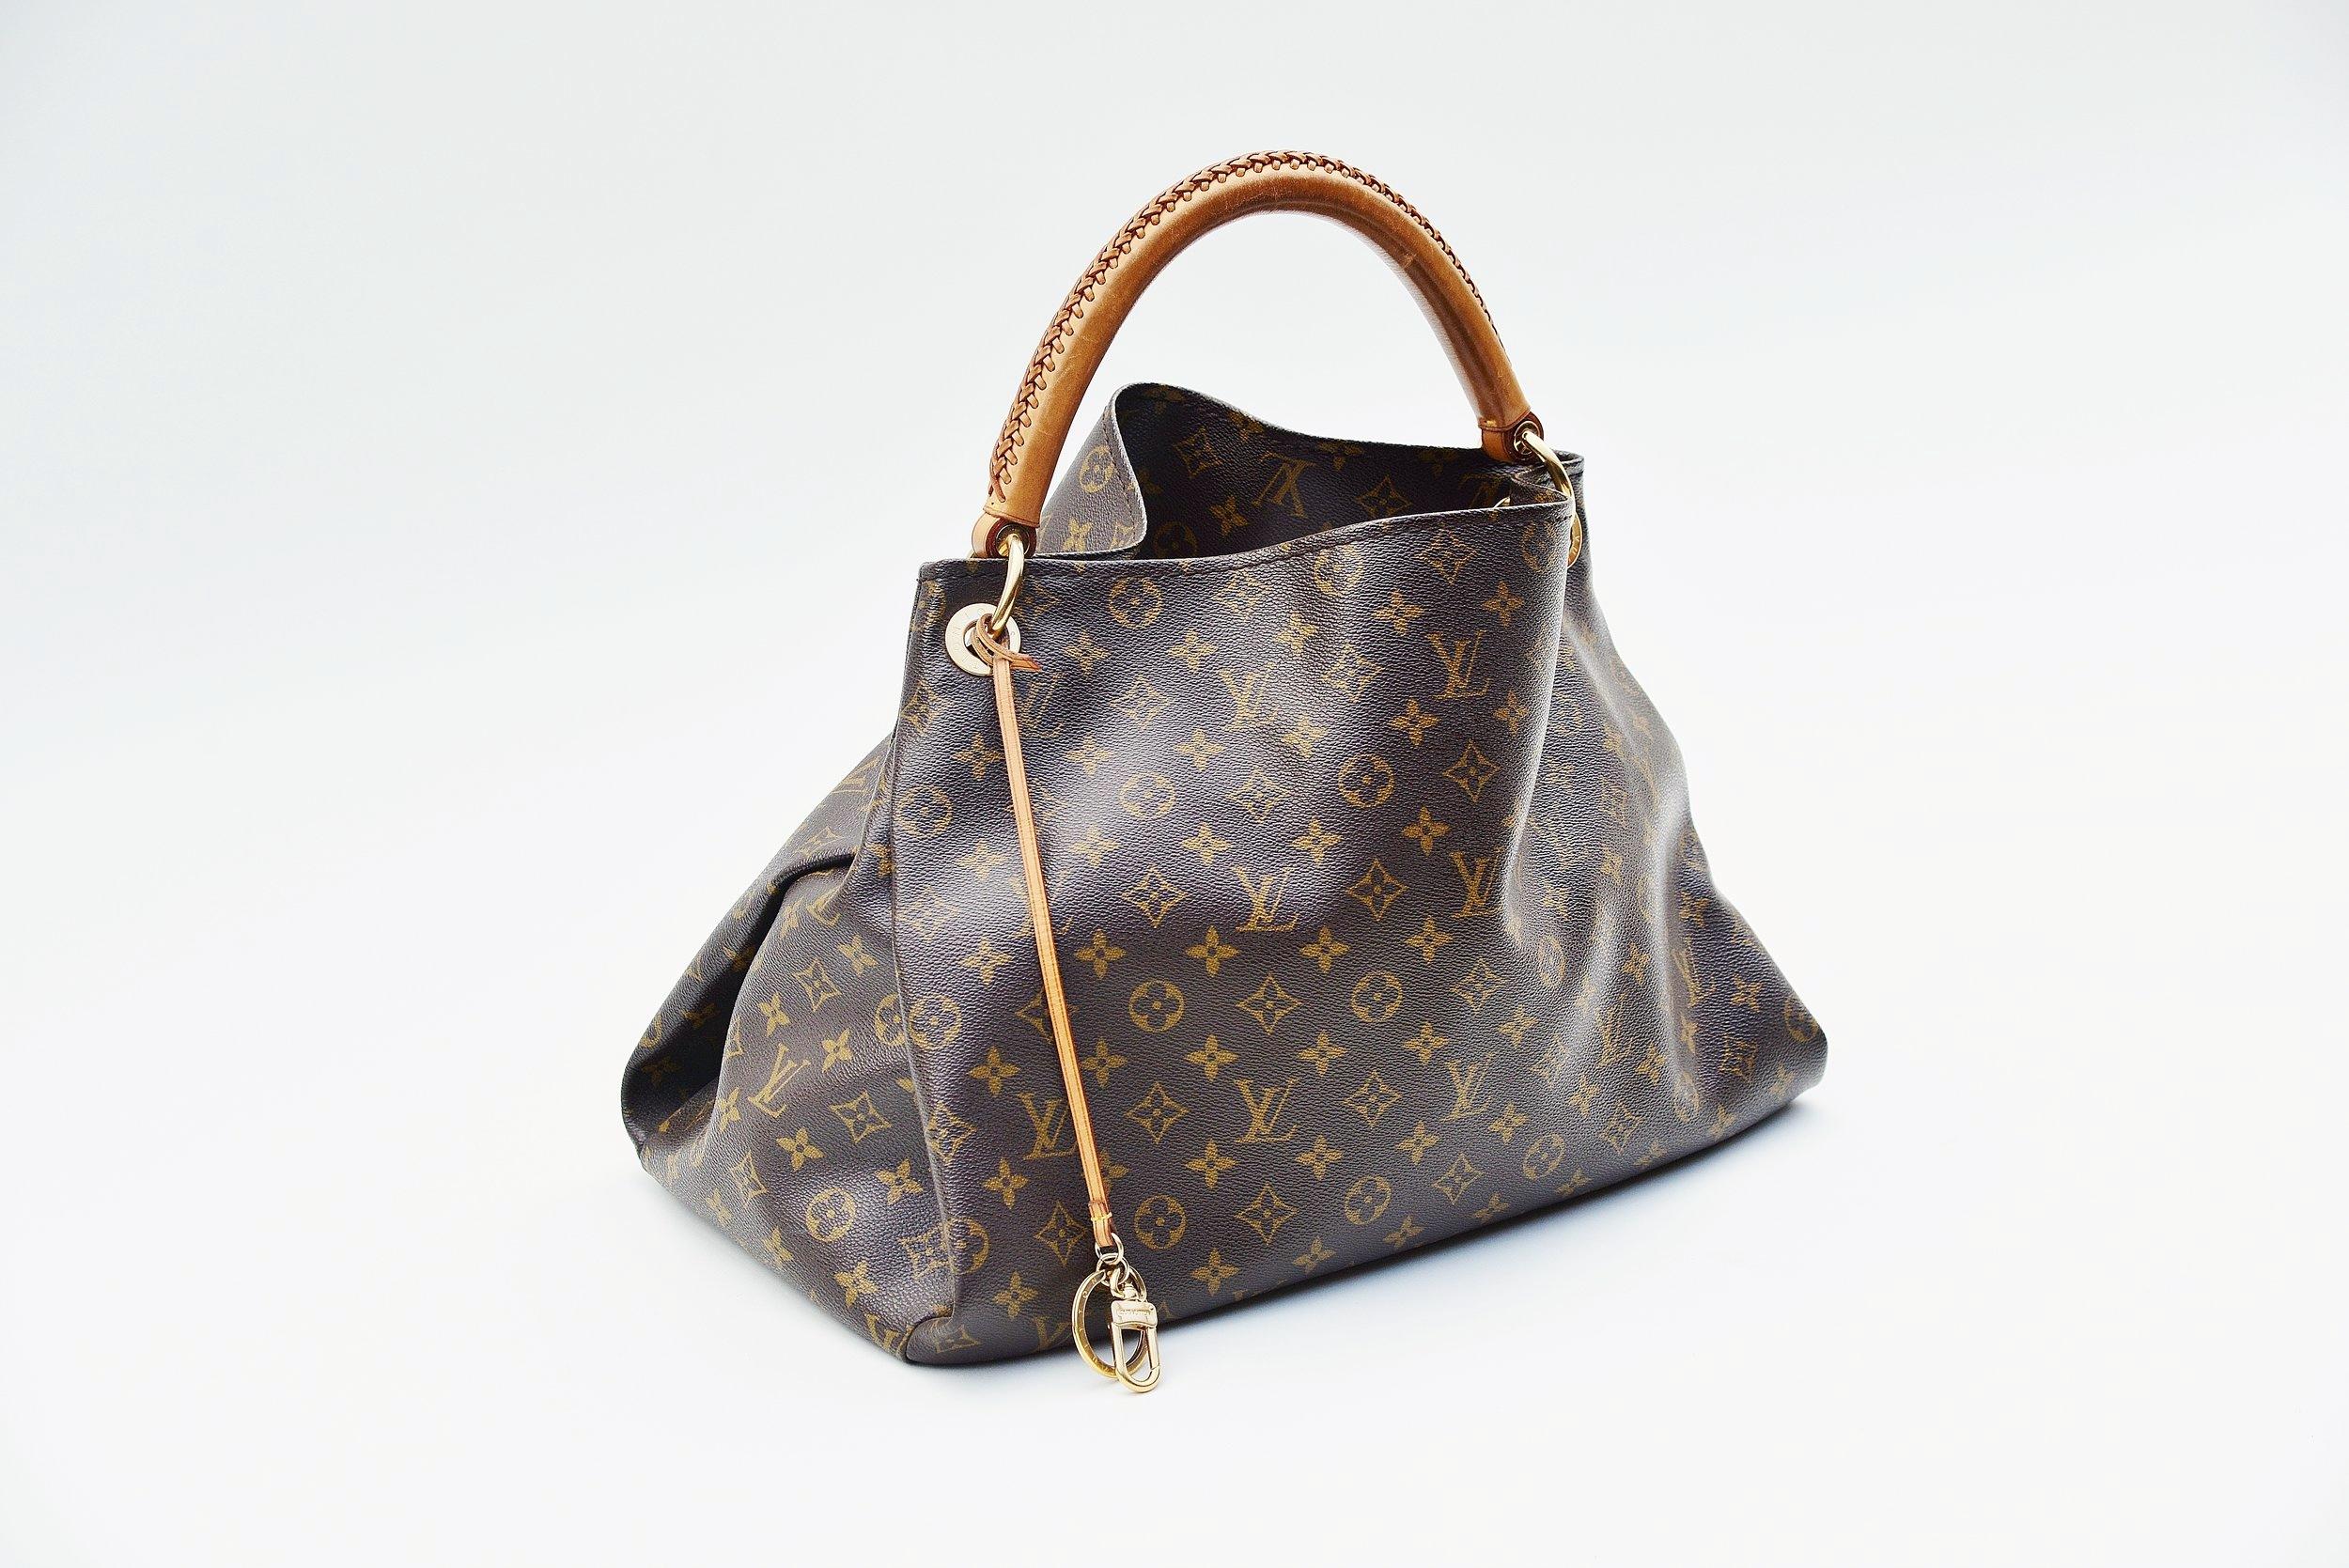 From the collection of Savineti we offer this Louis Vuitton Artsy:
-	Brand: Louis Vuitton
-	Model: Artsy
-	Year: 2011
-	Serial Number: GI4191
-	Condition: Good 
-	Materials: canvas, leather, gold-tone hardware 
-       Length of the handle: